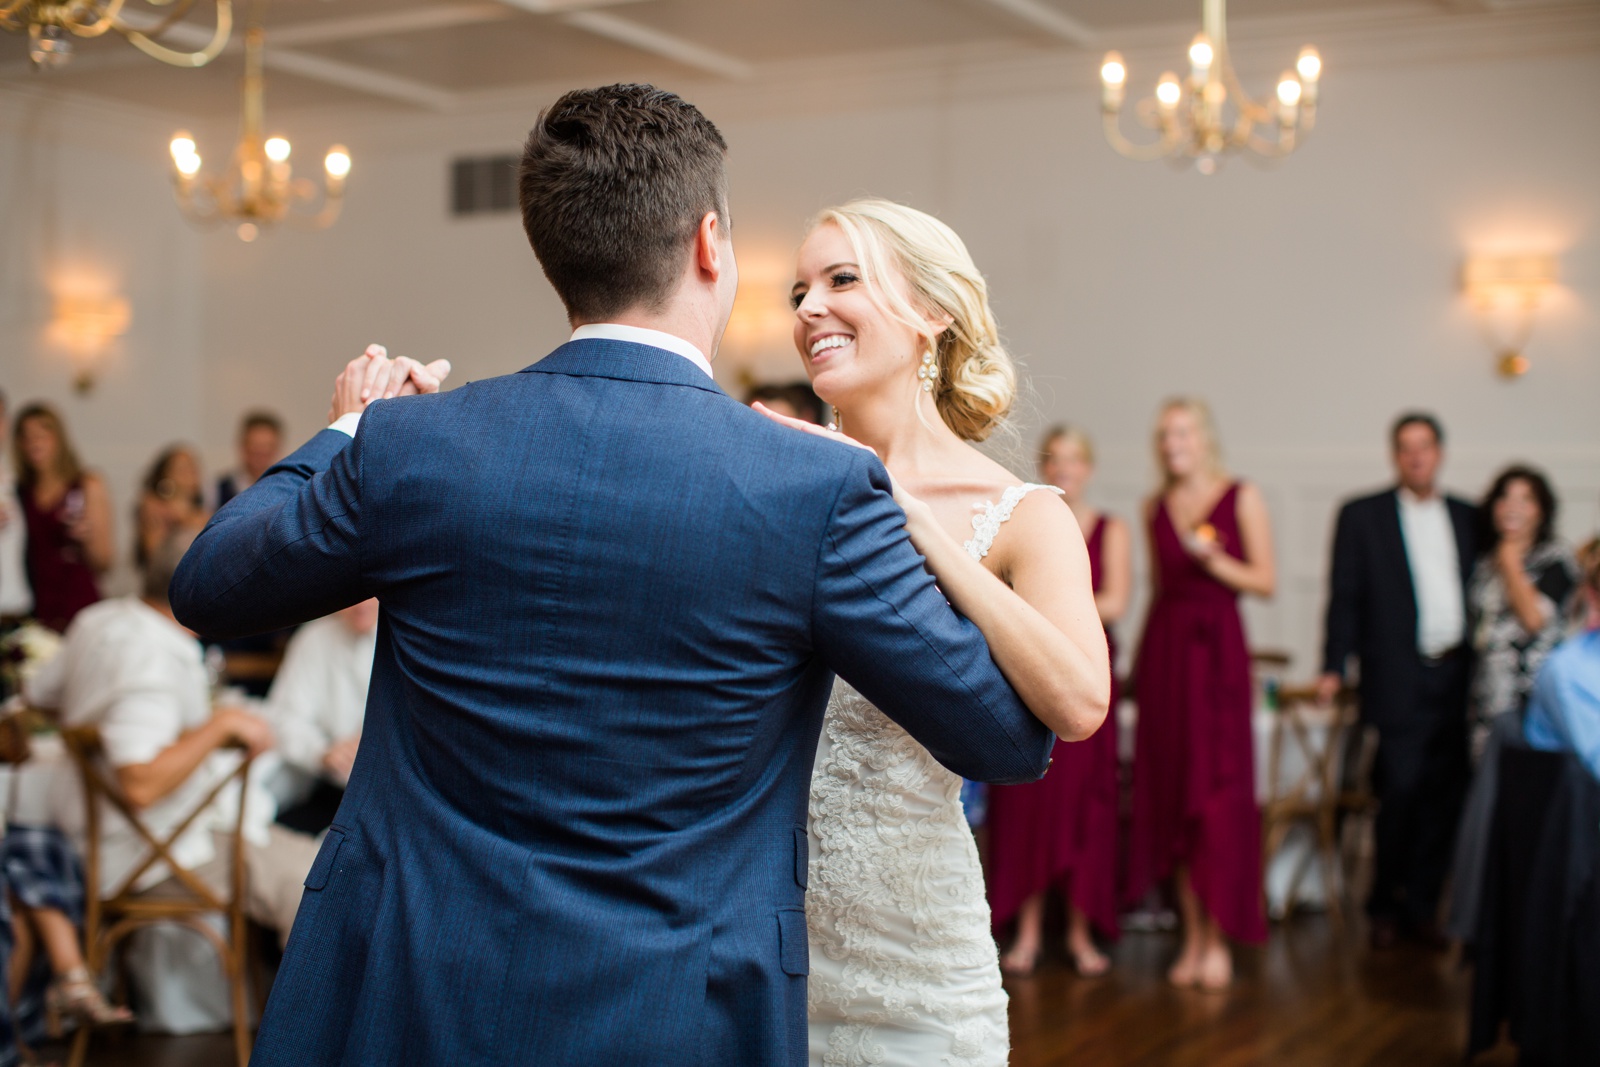 Bride and Groom First Dance Portraits